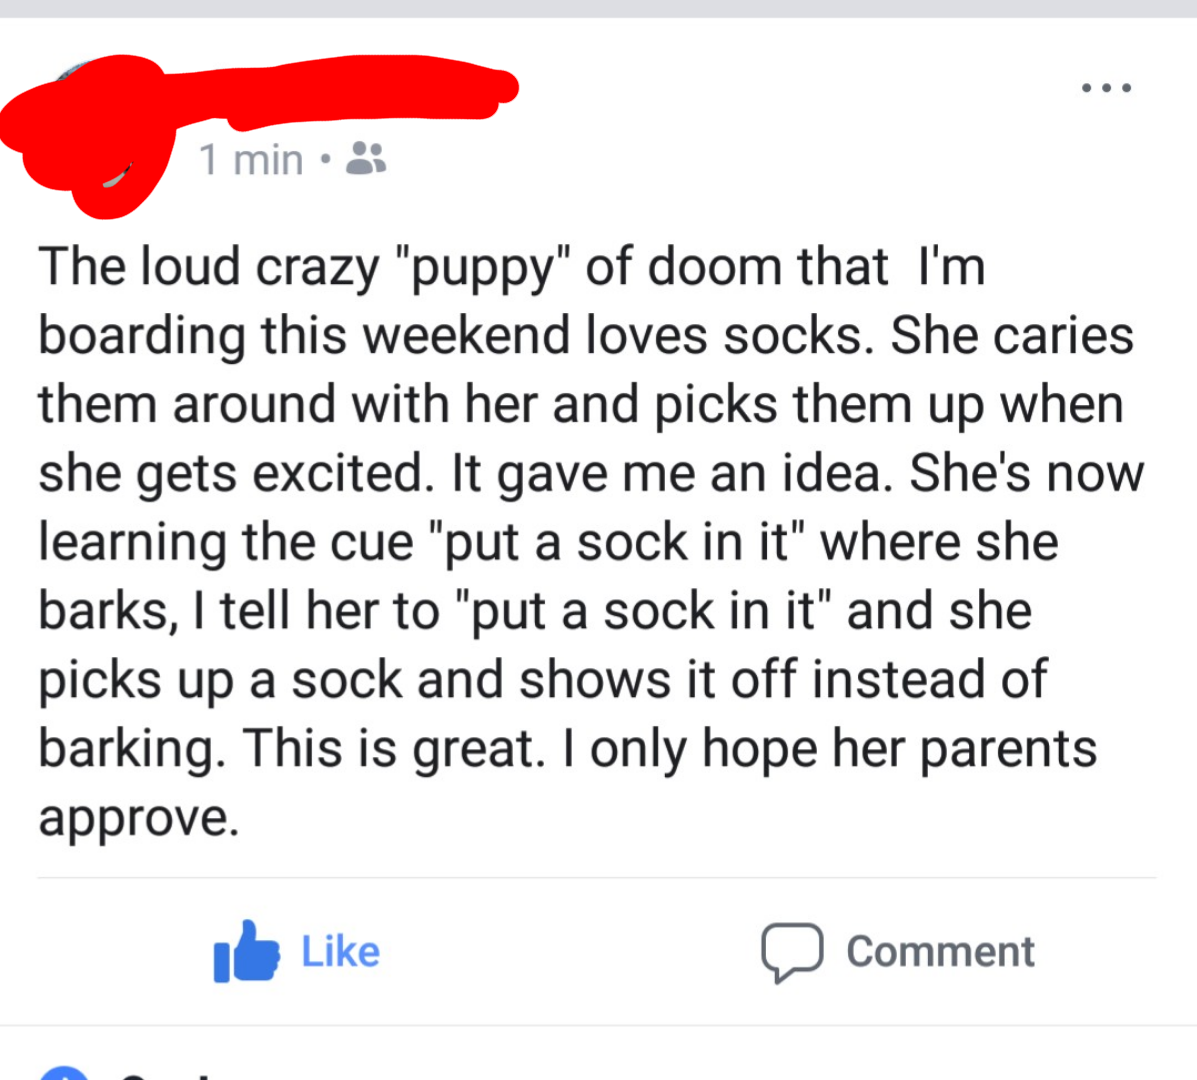 terrible facebook post - 1 min. The loud crazy "puppy" of doom that I'm boarding this weekend loves socks. She caries them around with her and picks them up when she gets excited. It gave me an idea. She's now learning the cue "put a sock in it" where she